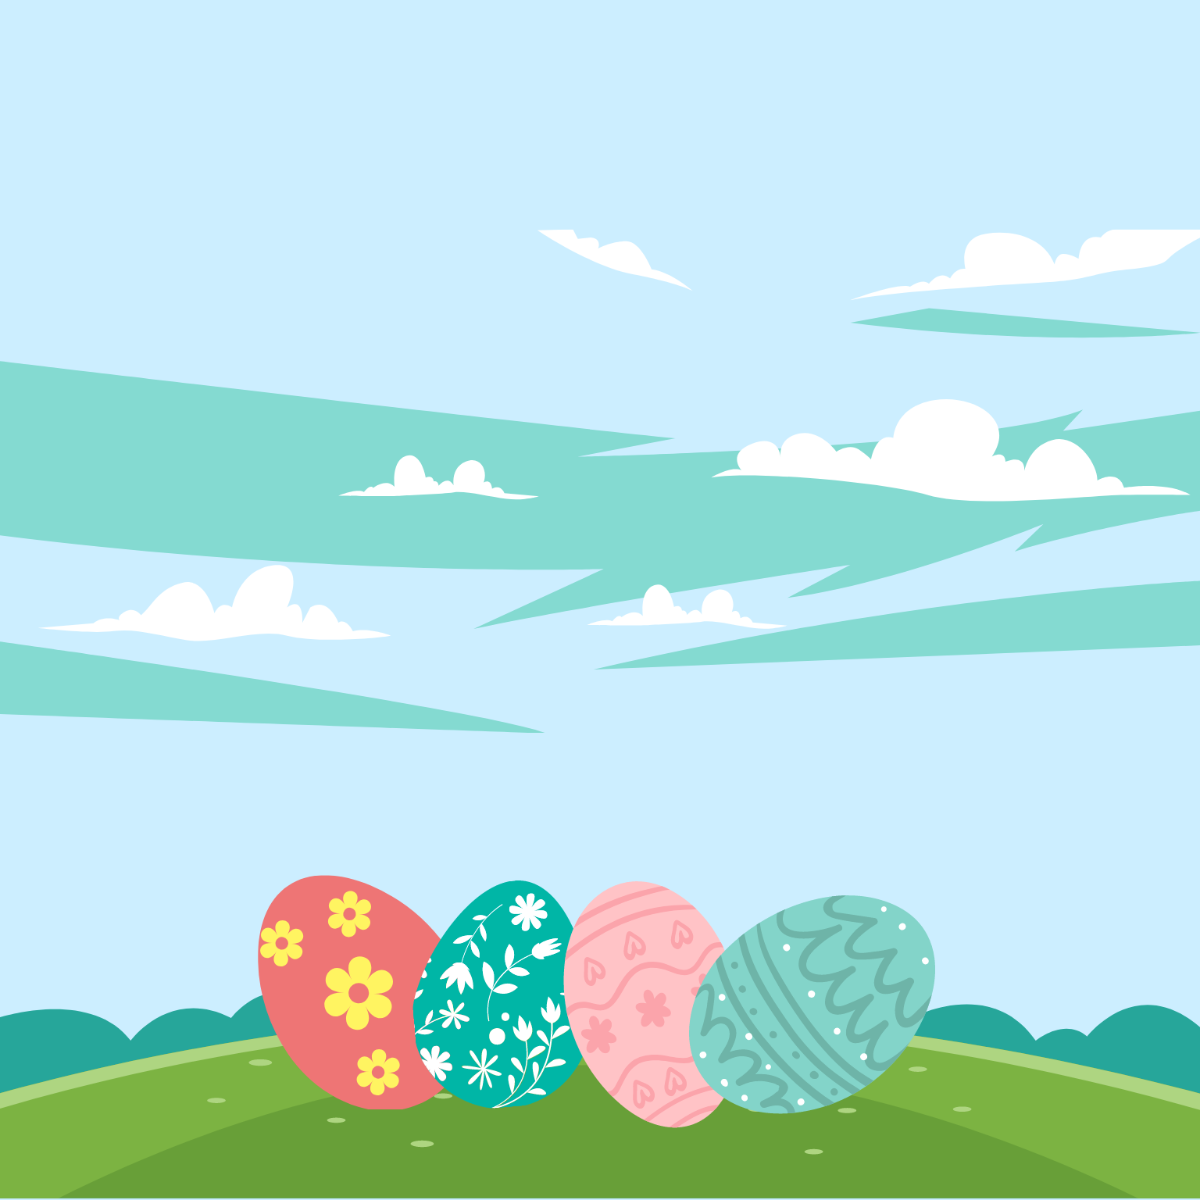 Easter Day Clipart